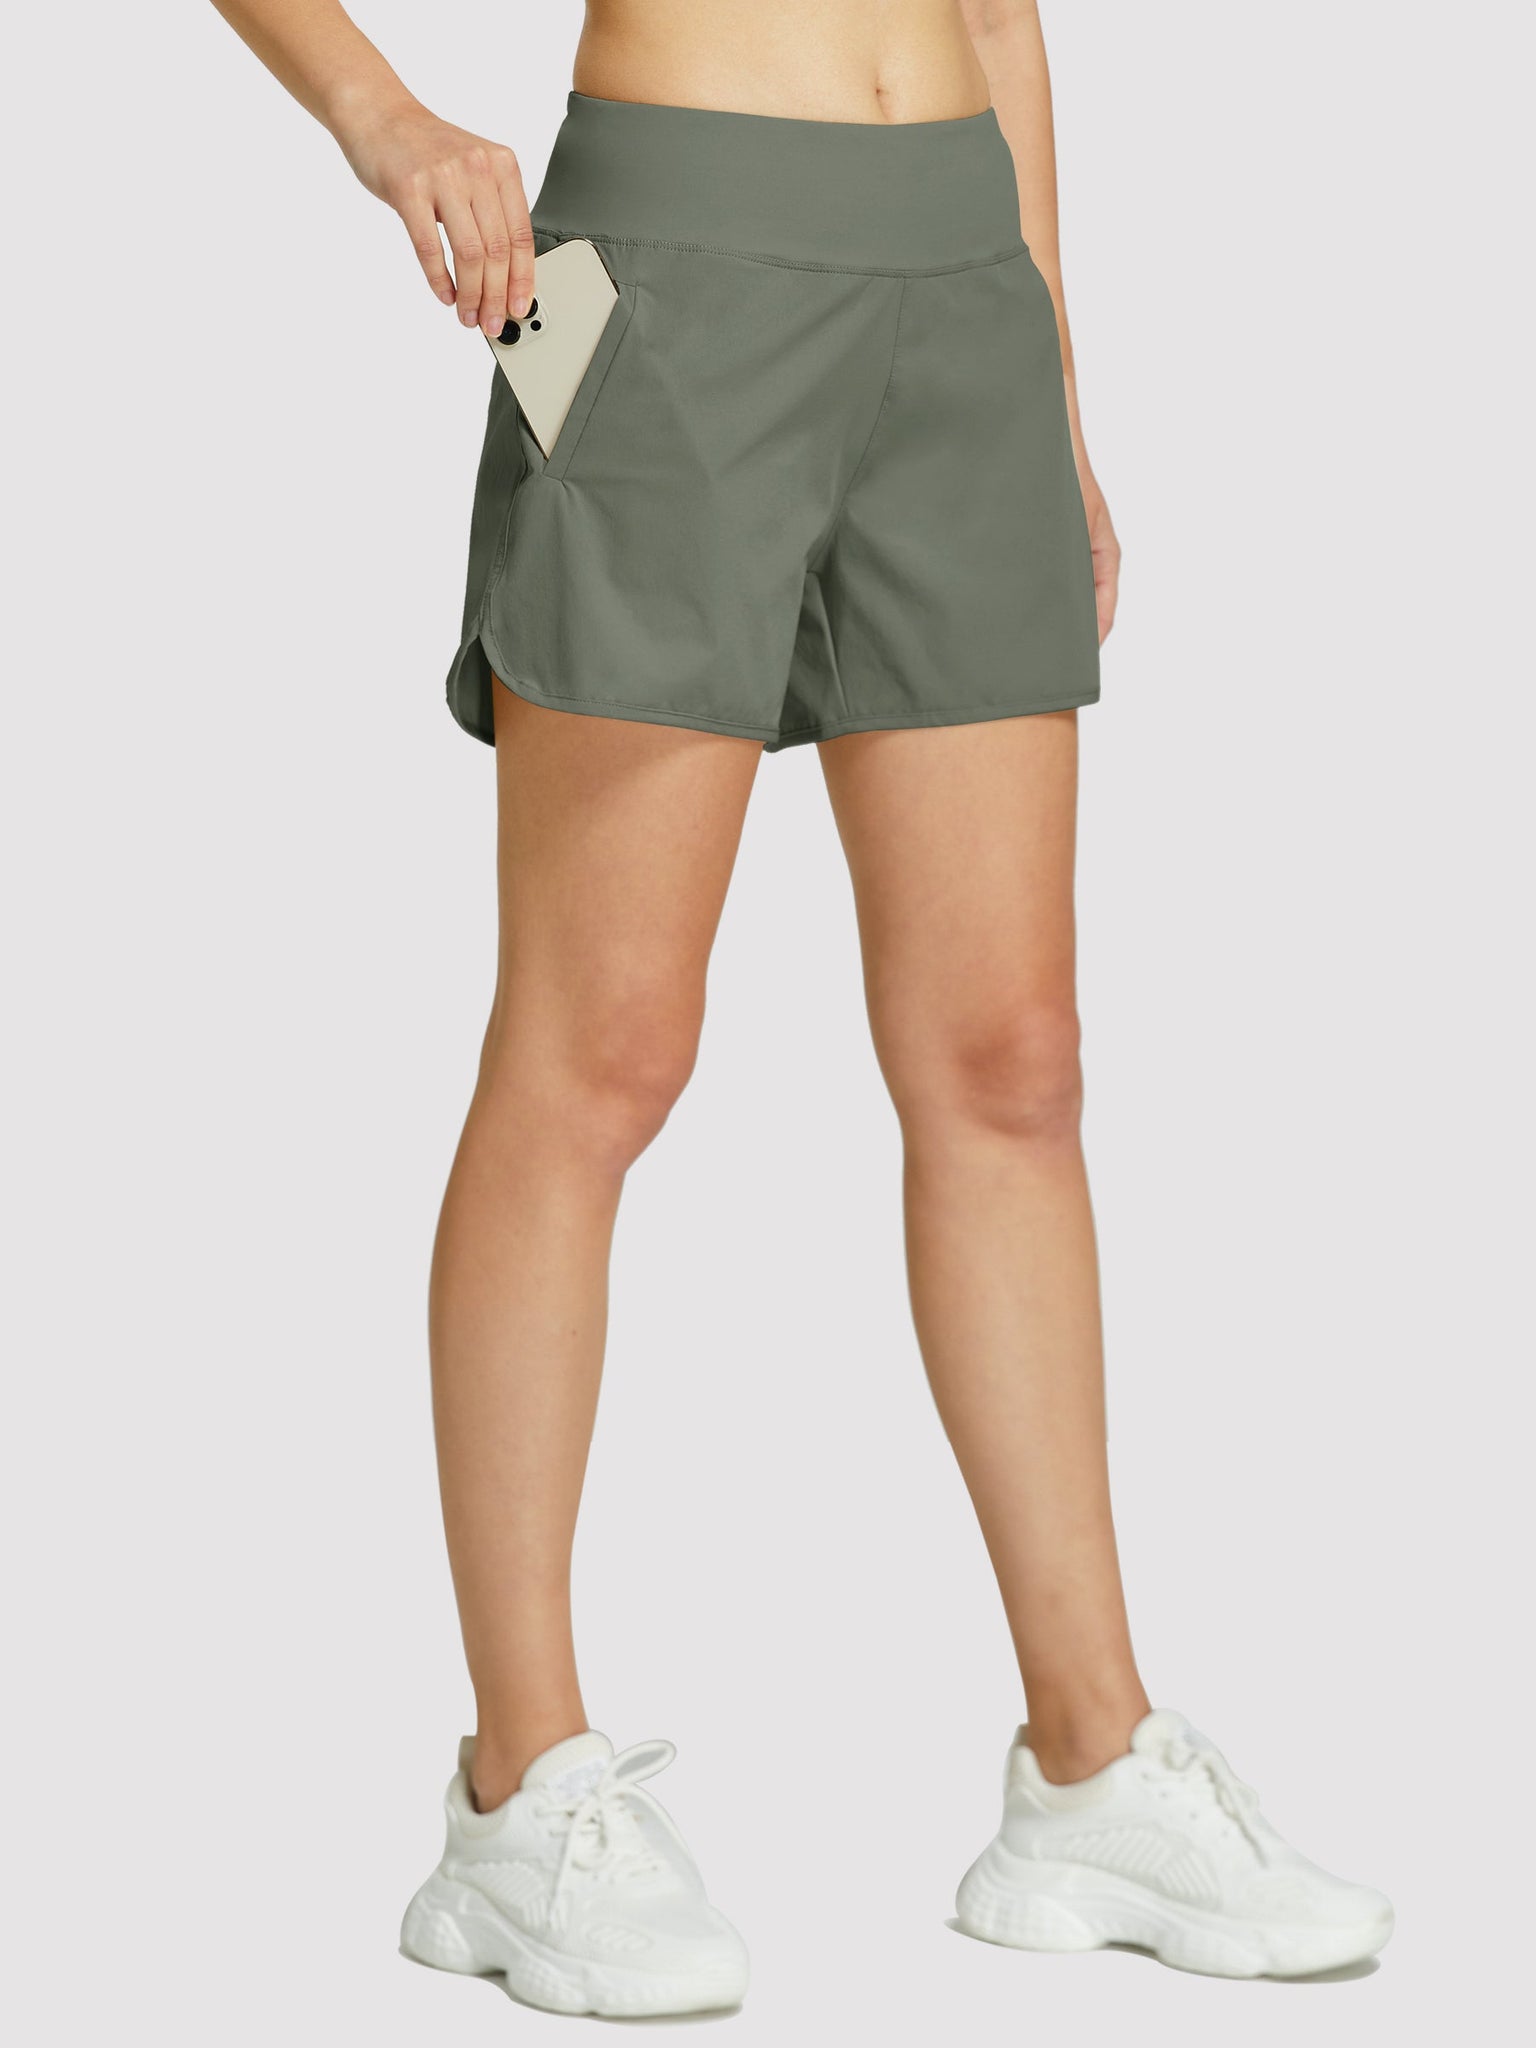 Womens High Rise Running Athletic Shorts_Green2